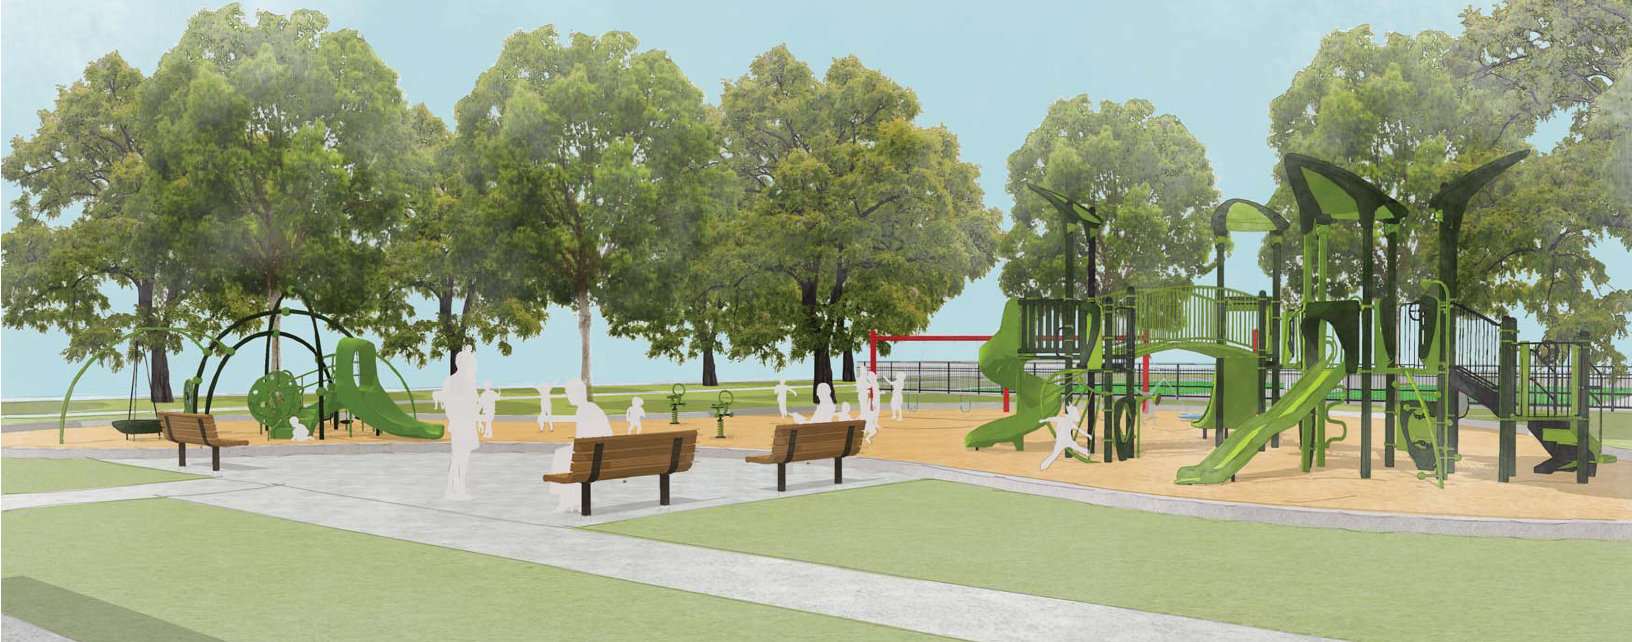 Valero Energy Foundation Announces Gift to Renovate Playground in Manchester's Hartman Park